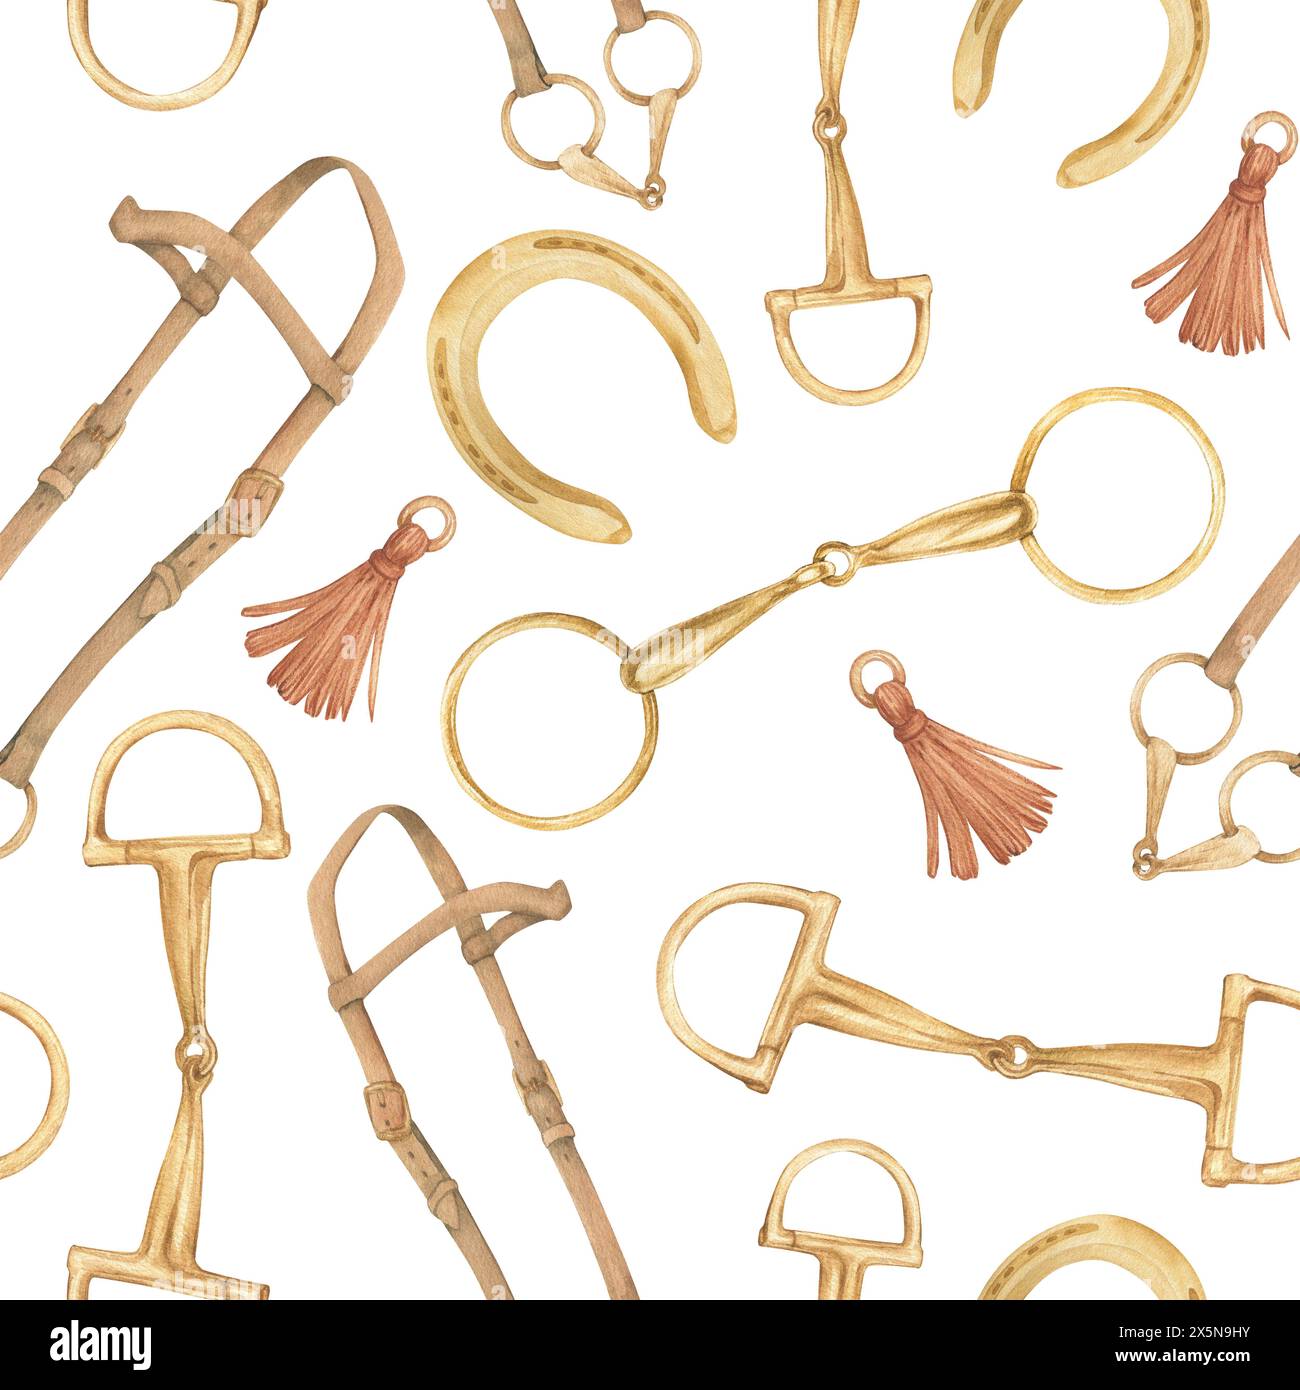 Seamless pattern with watercolor illustration of golden snaffle, bridle, horseshoes, bit with D-Ring and circle rings. Equipment for horse riding set Stock Photo